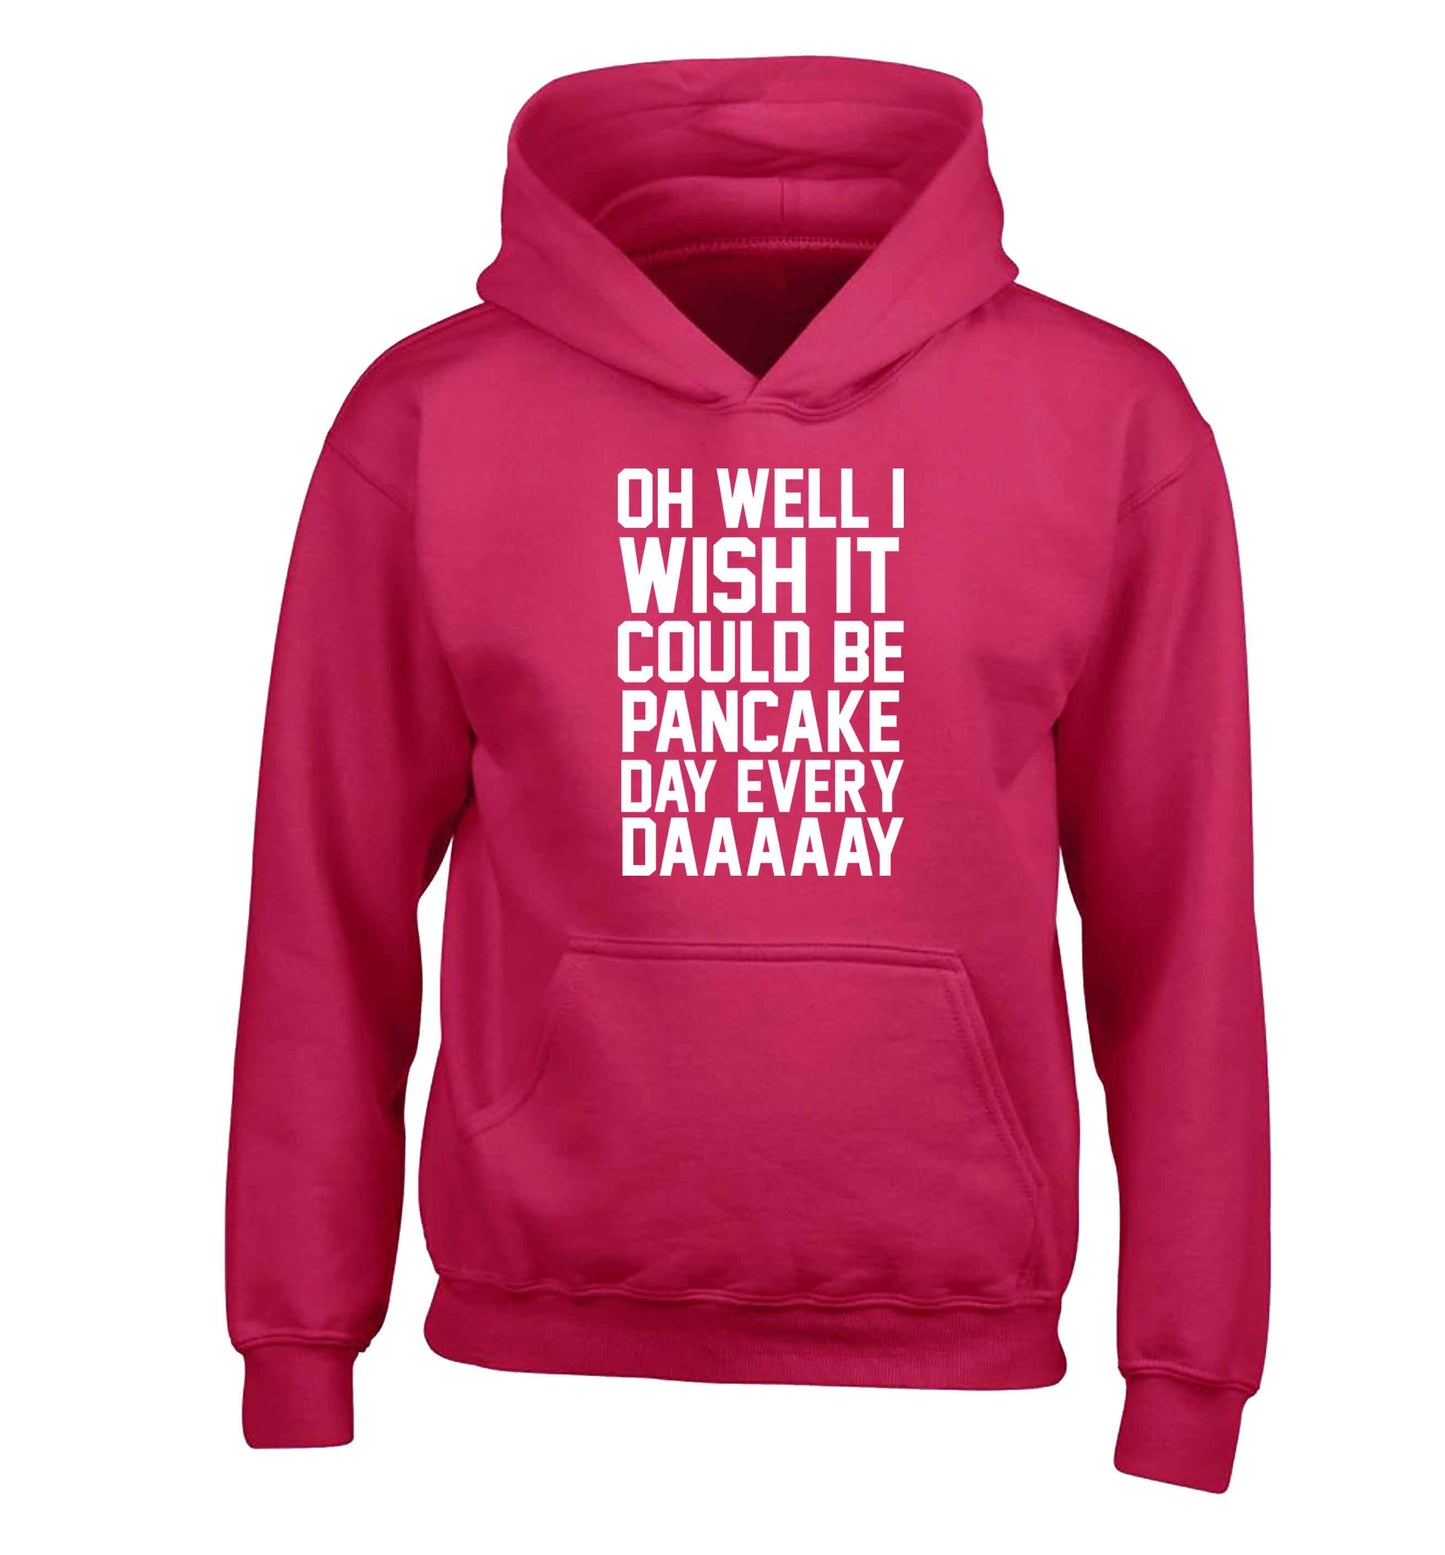 Oh well I wish it could be pancake day every day children's pink hoodie 12-13 Years